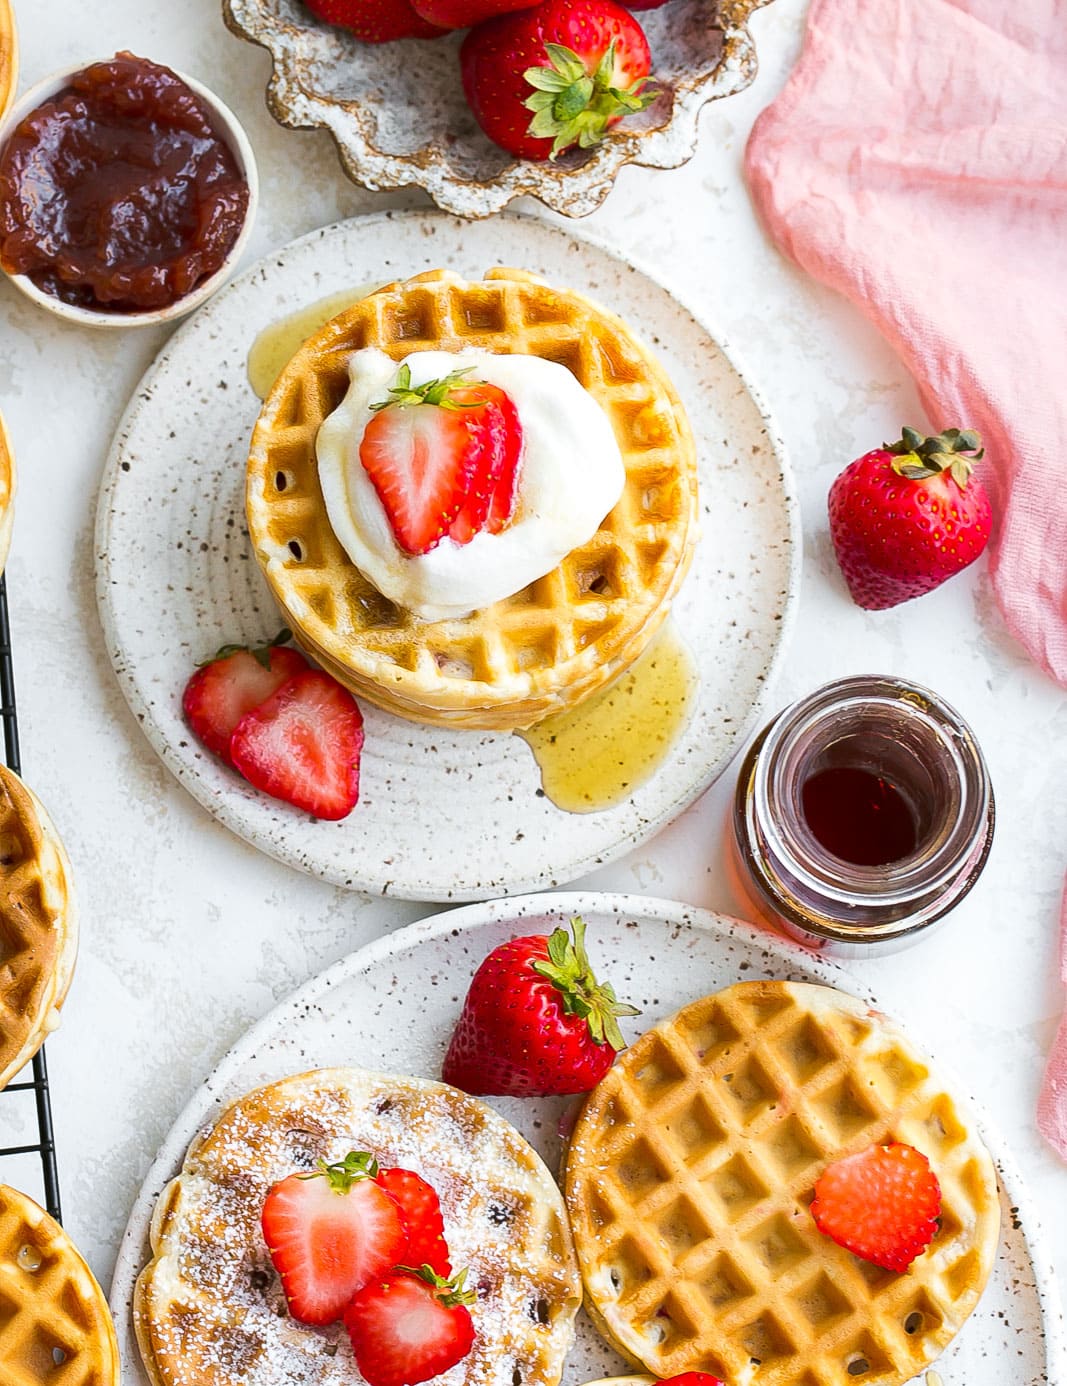 Waffles on a plate with strawberries on top.